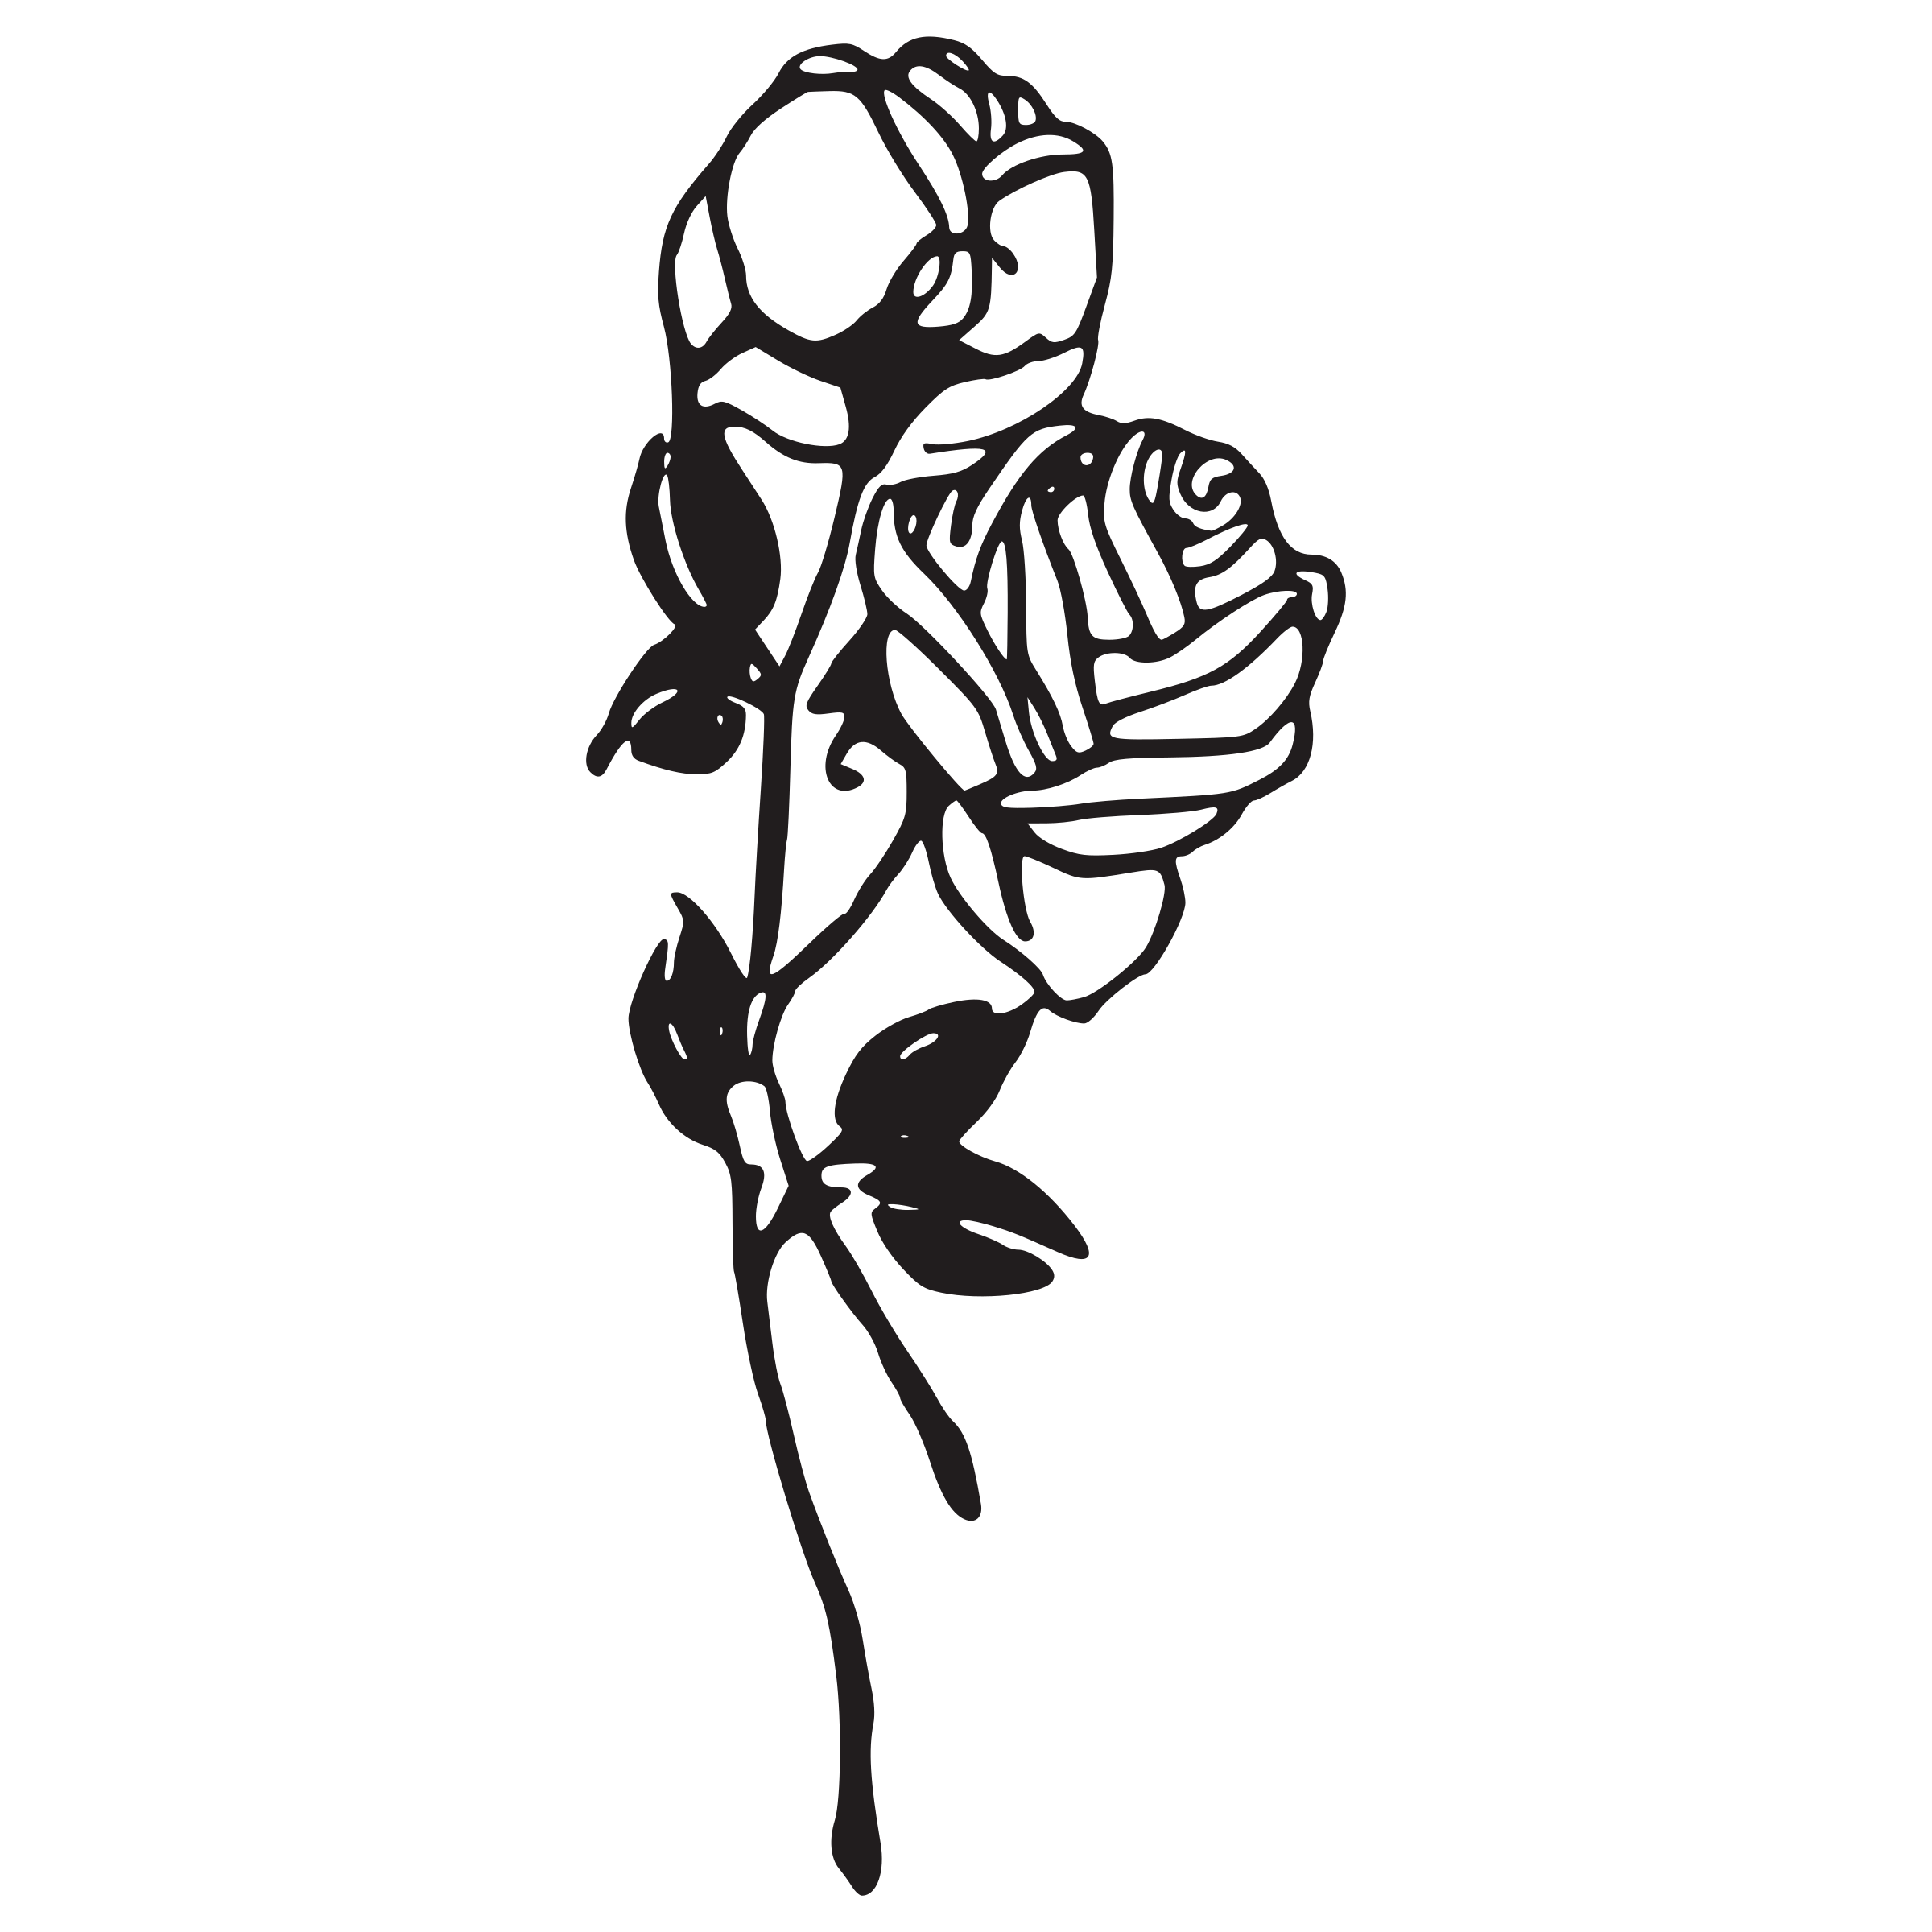 Free: Download Rose Tattoo Transparent - Rose Tattoo Png - nohat.cc